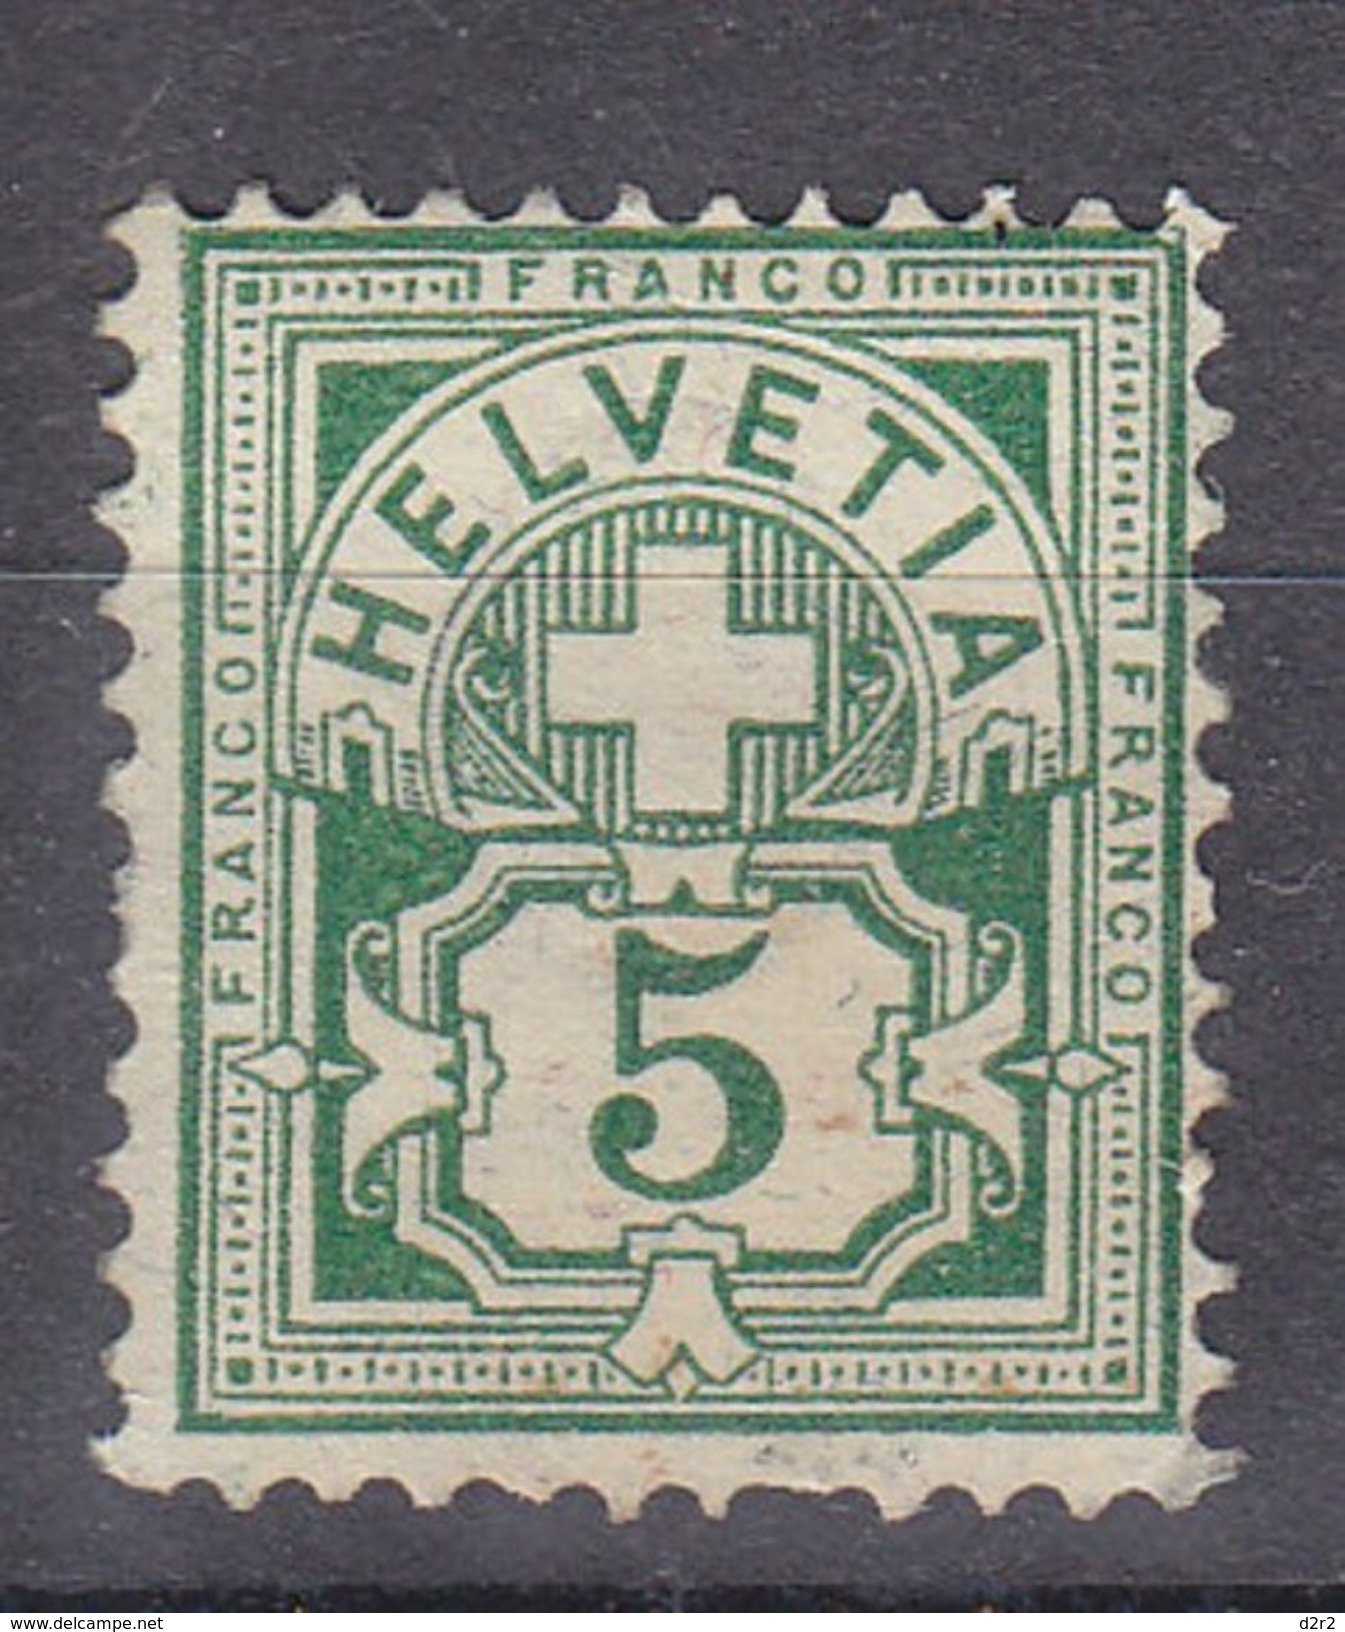 65B** - TYPE CHIFFRE - 1 DENT COURTE - COTE 30.-- CHF - Unused Stamps